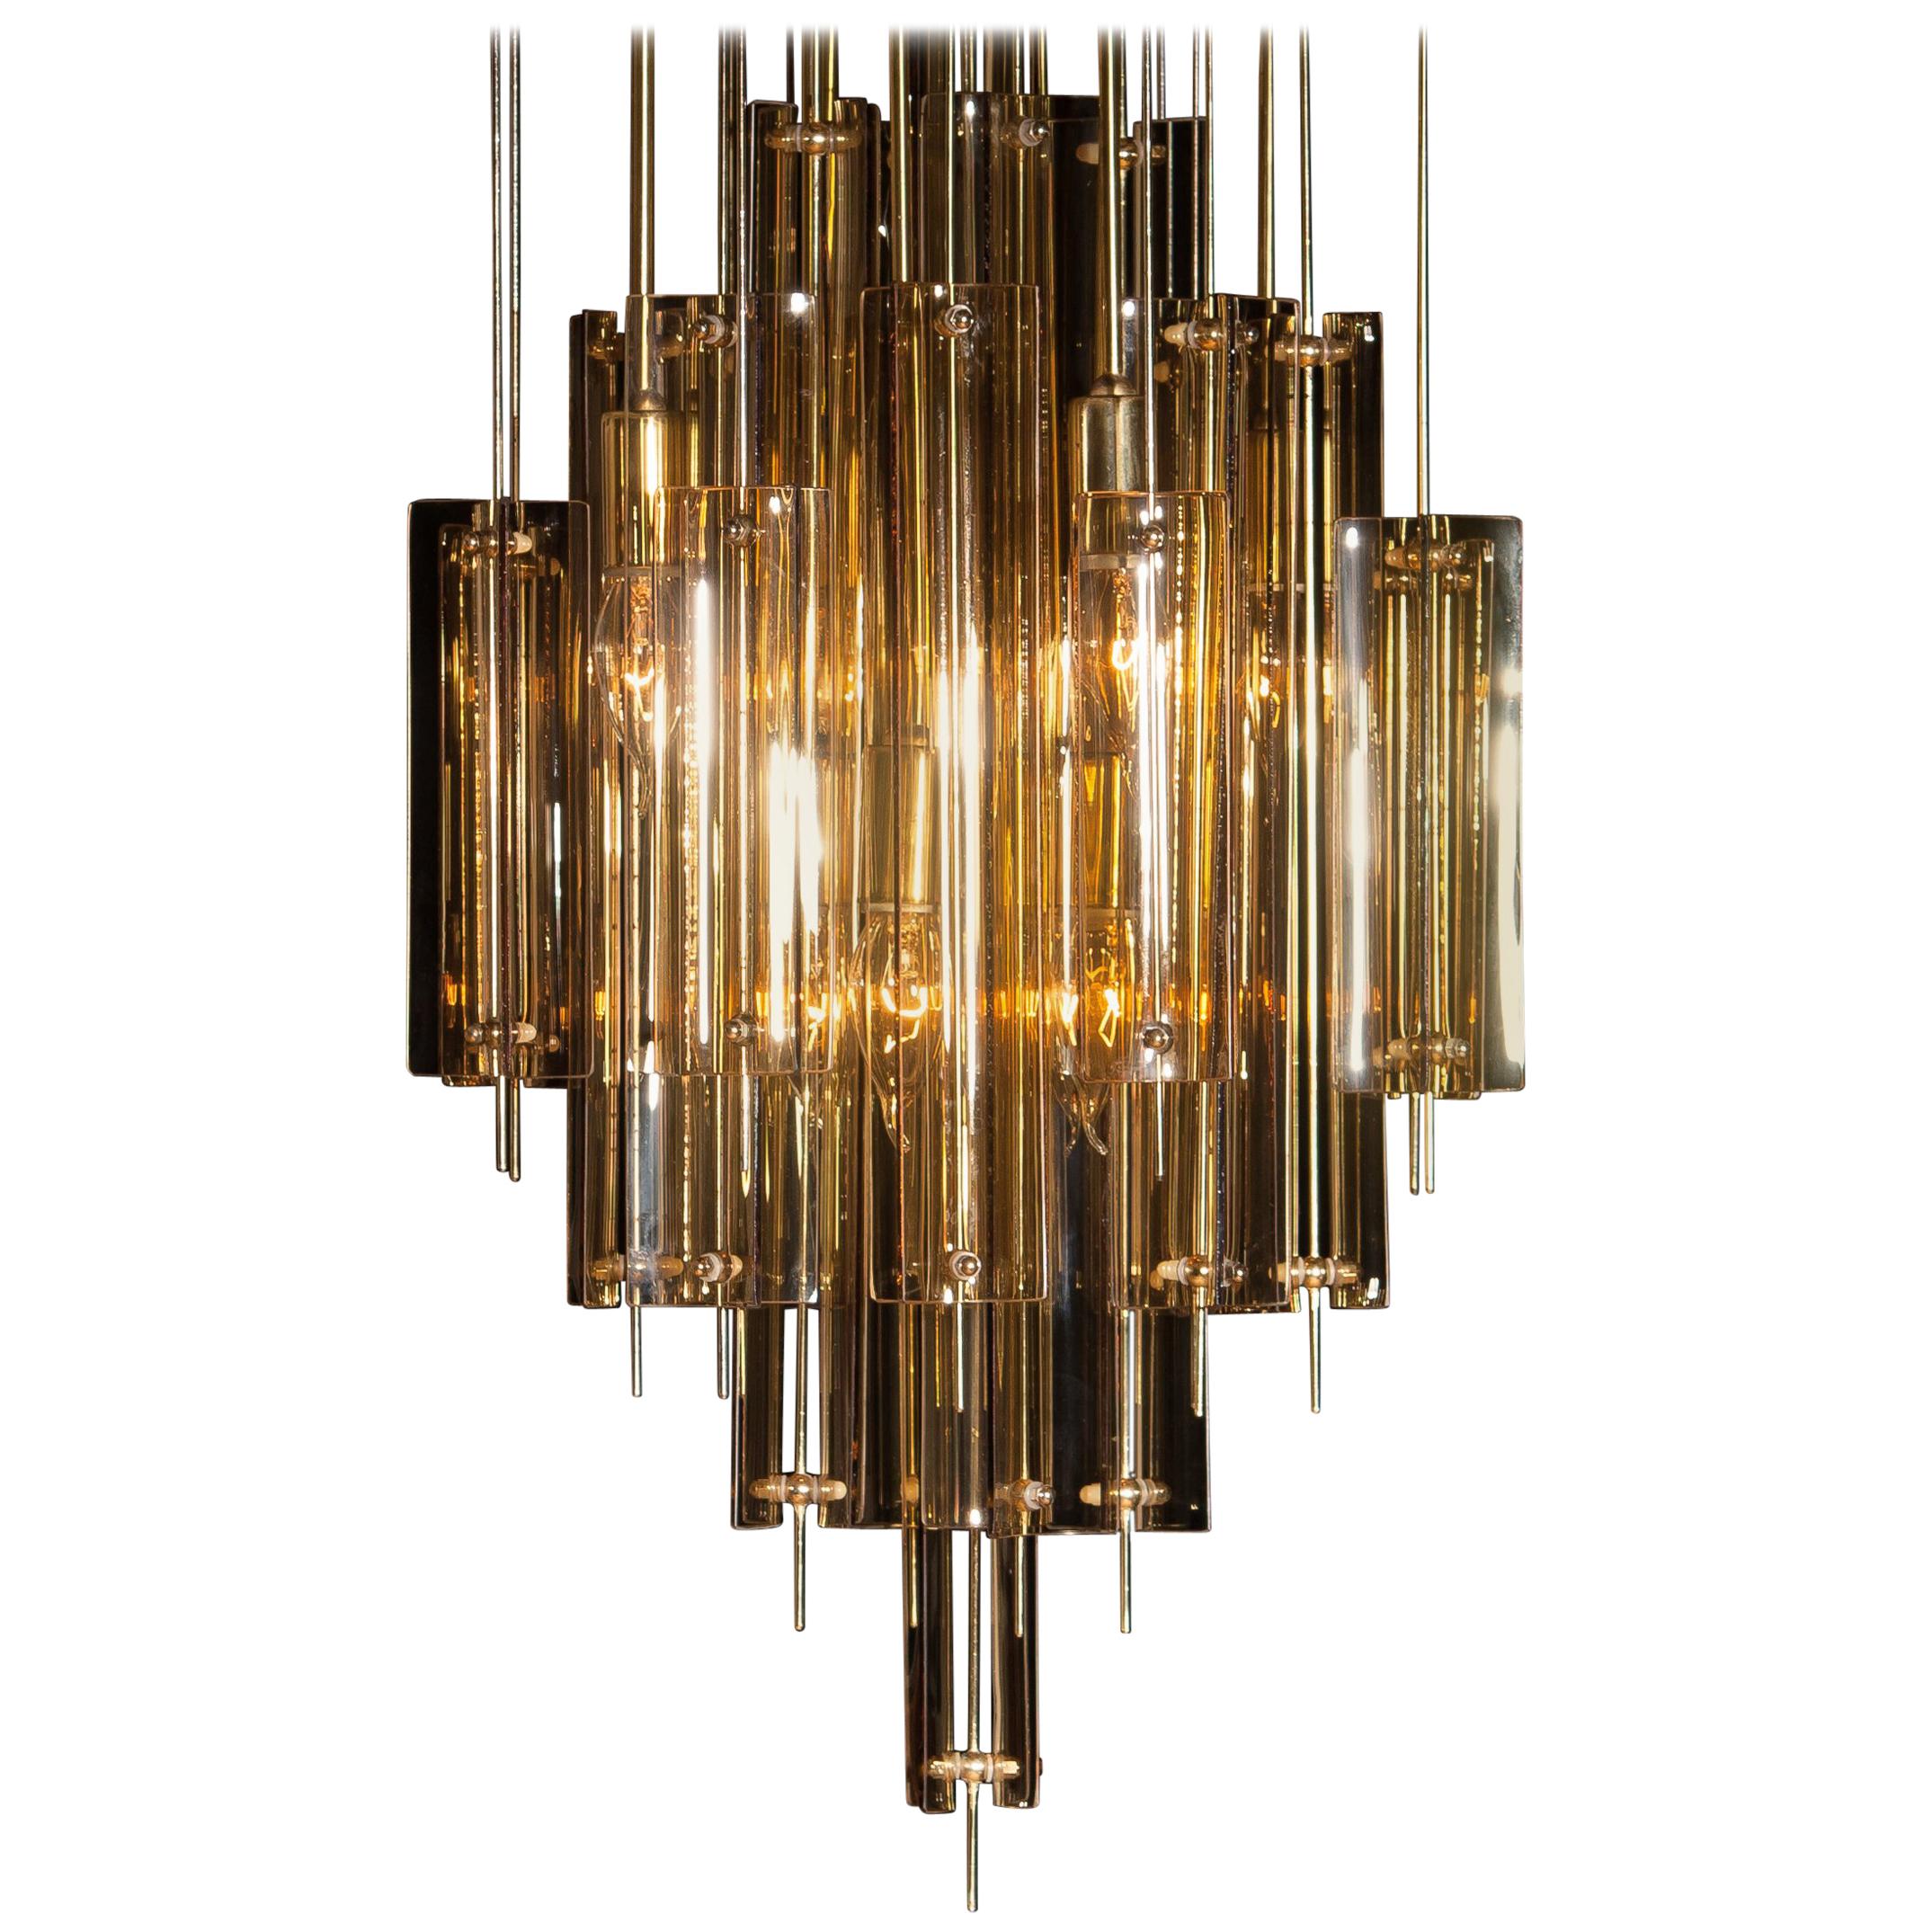 Mid-20th Century 1960s Brass Chandelier with Smoked Glass by Verner Panton